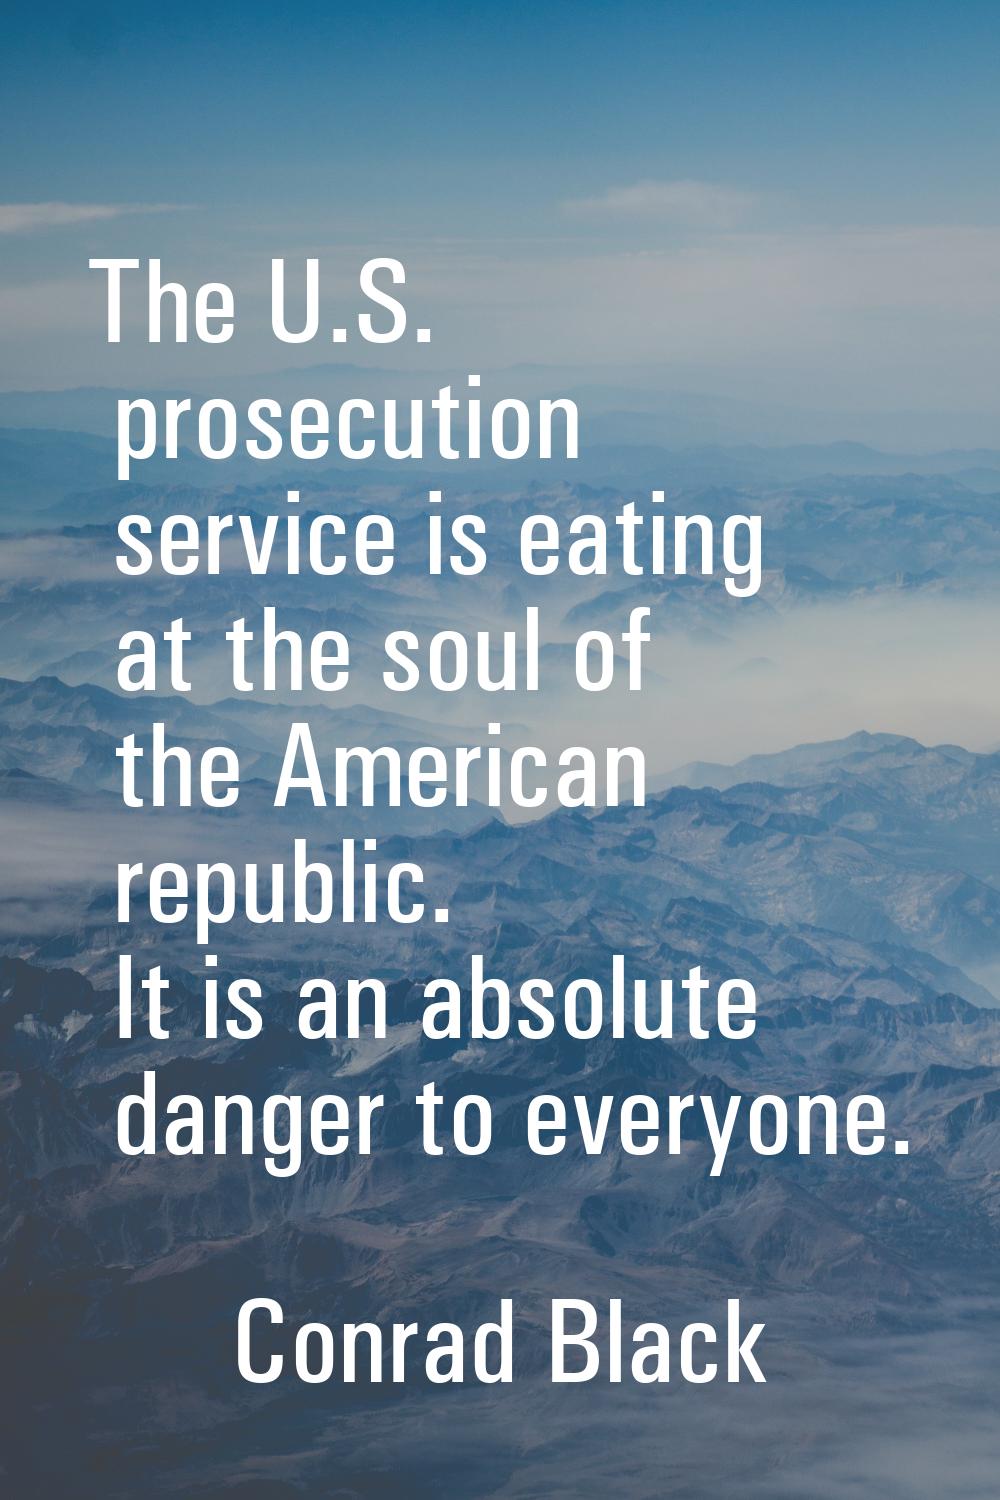 The U.S. prosecution service is eating at the soul of the American republic. It is an absolute dang